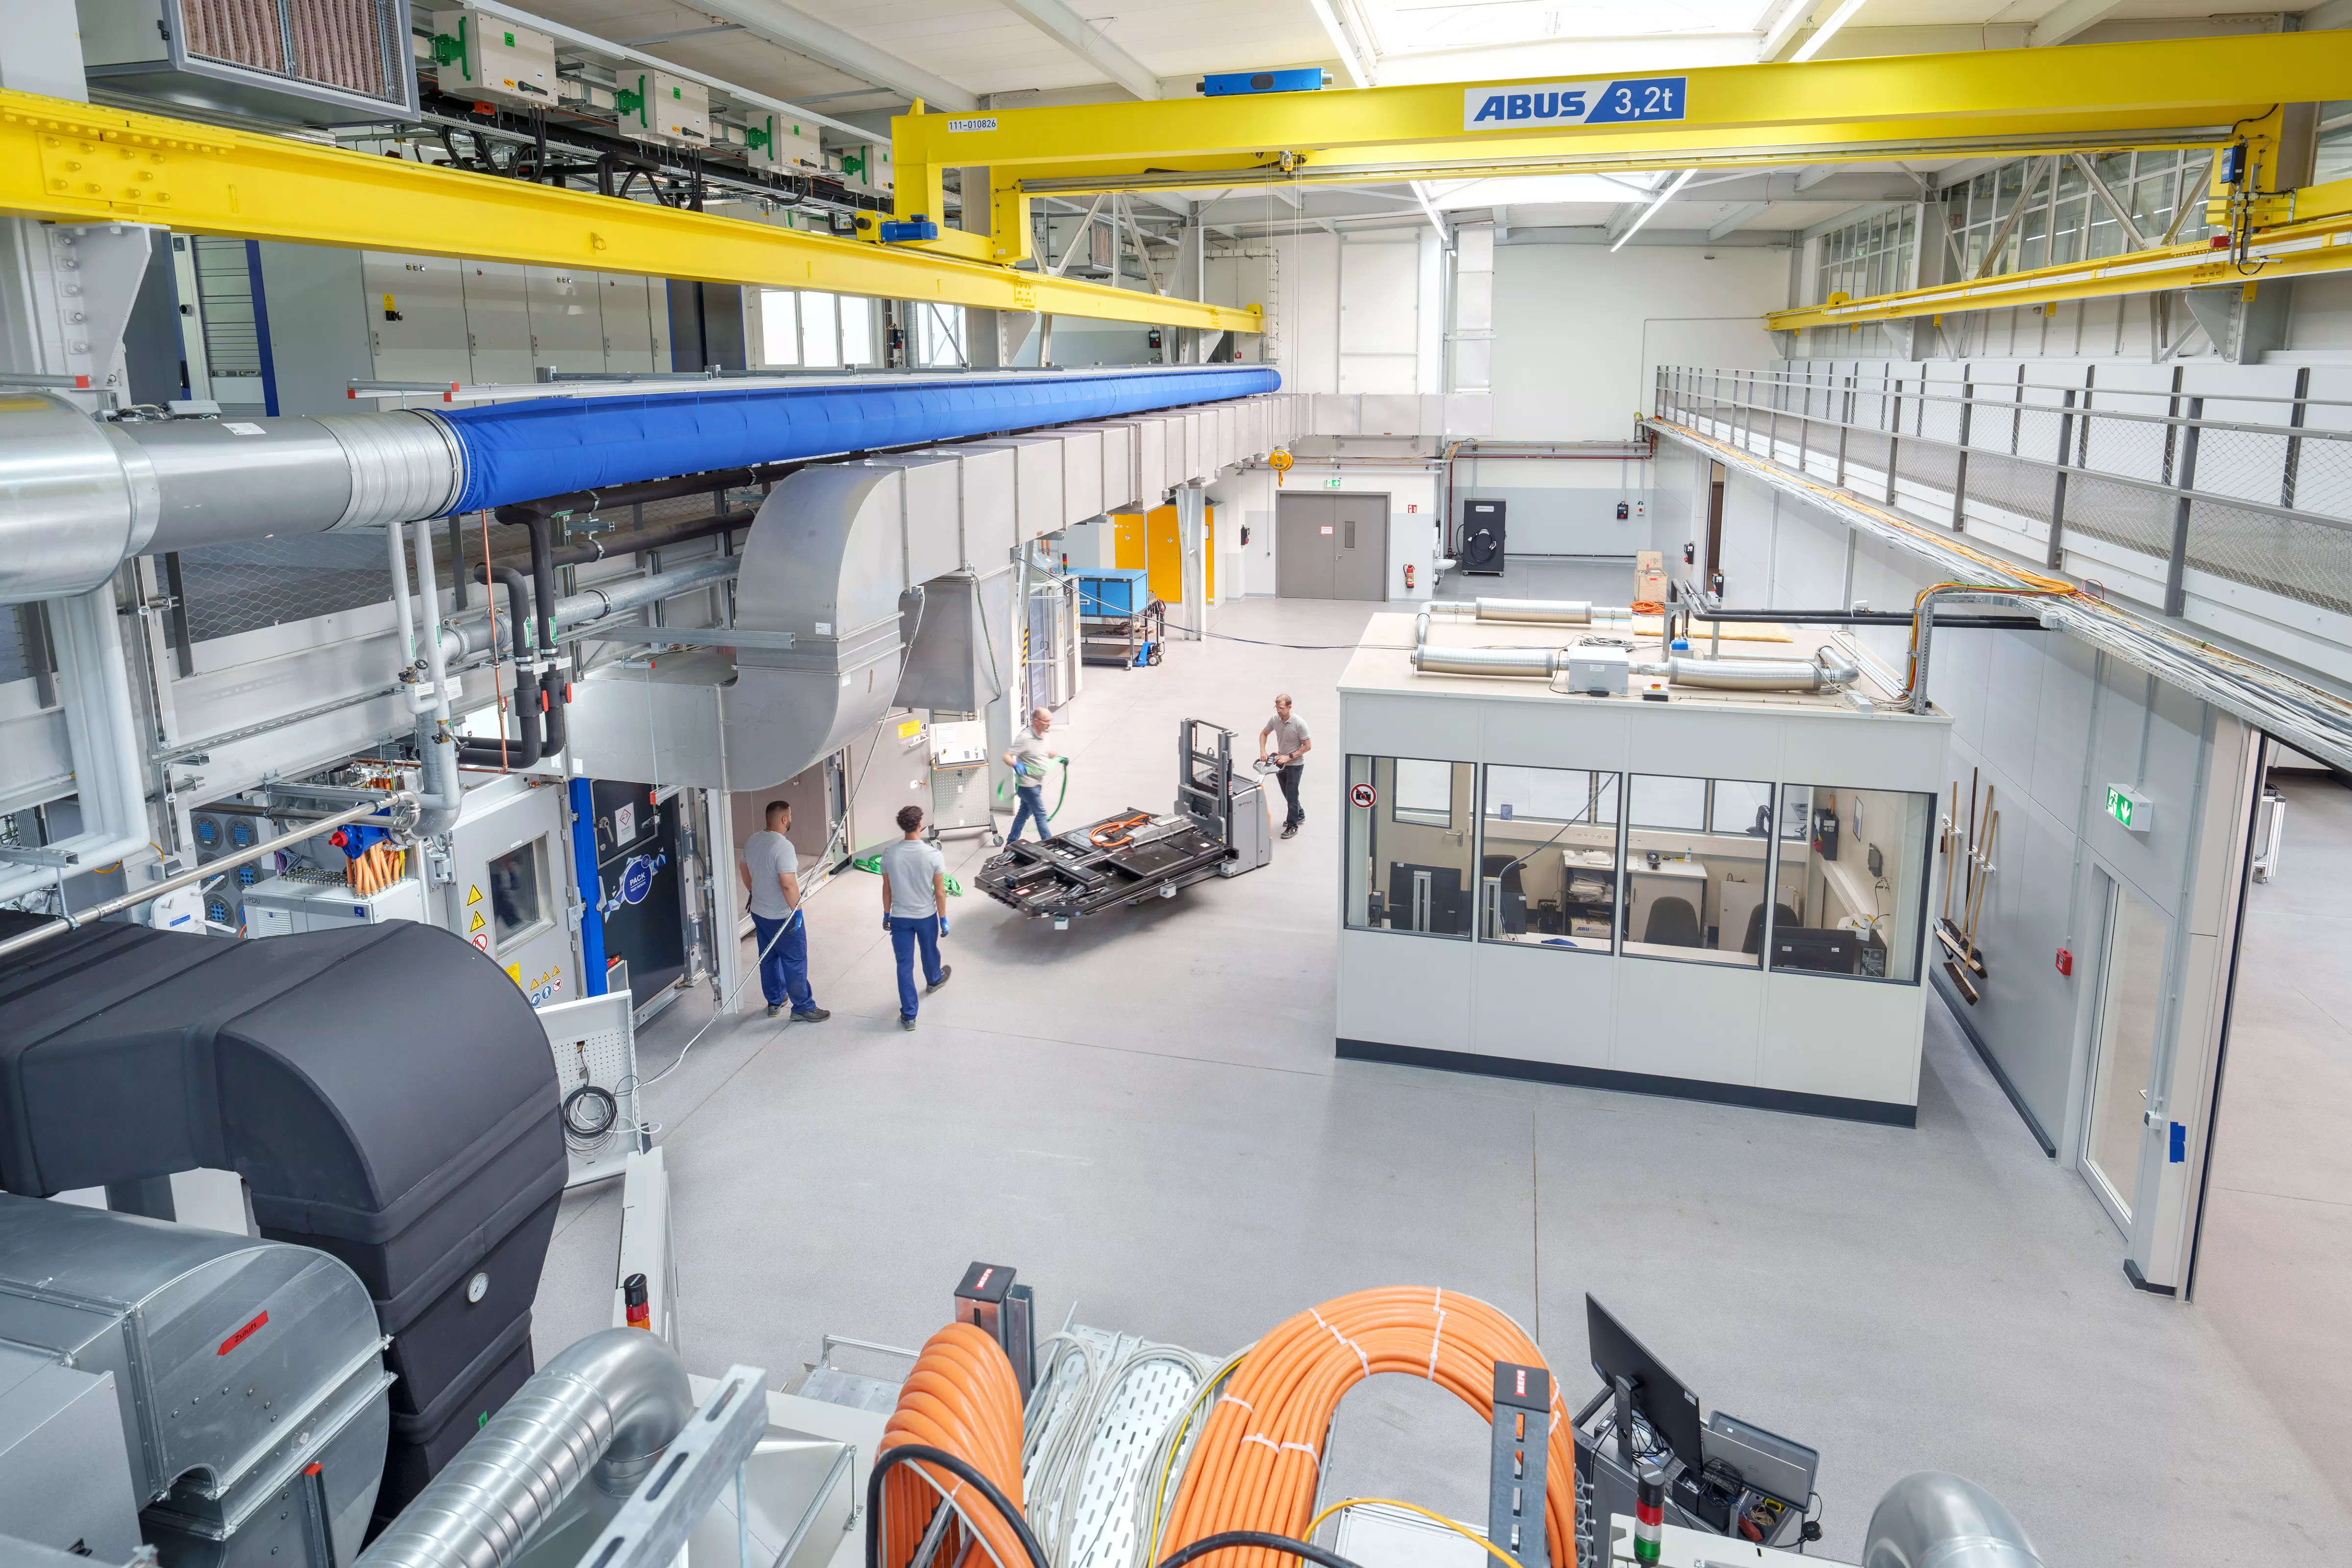 <p>The facility comprises a fully-featured prototype shop that includes a state-of-the art dual-robot laser welding station capable of handling active HV battery modules.</p>